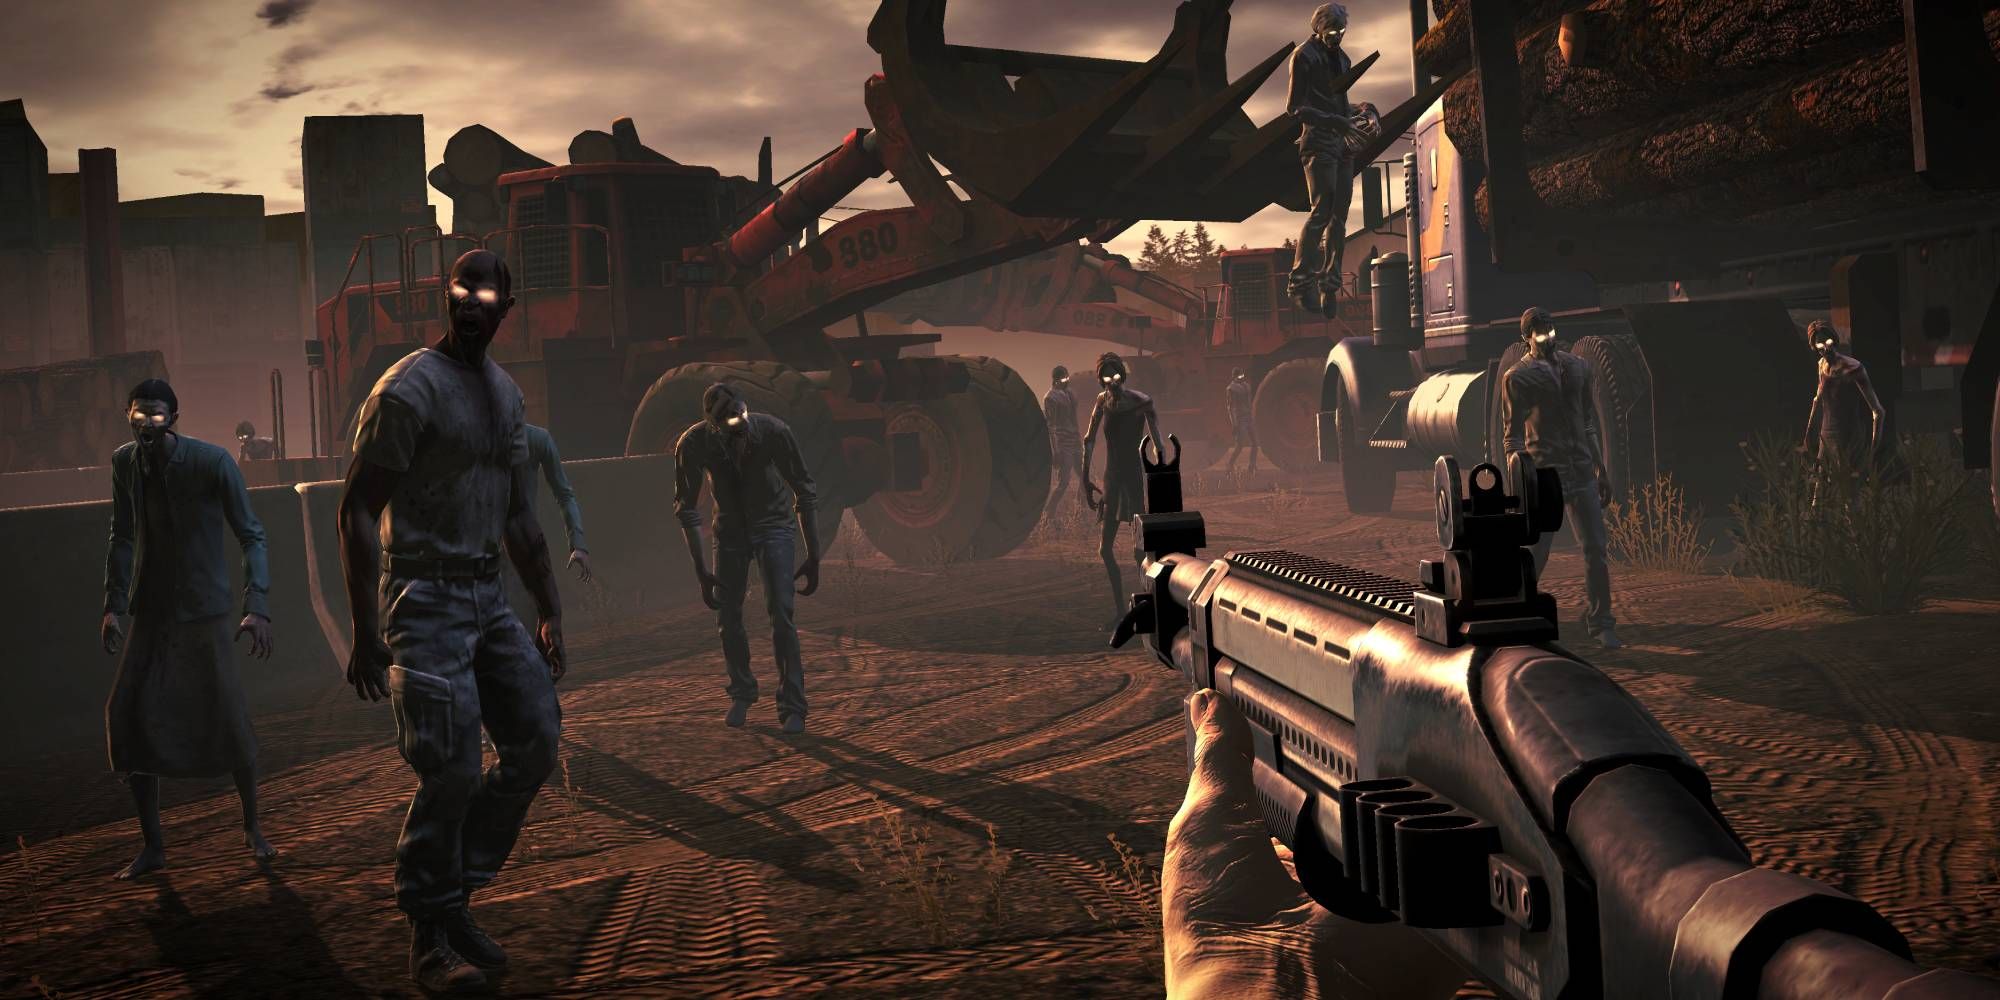 Zombies approaching a player holding up a gun